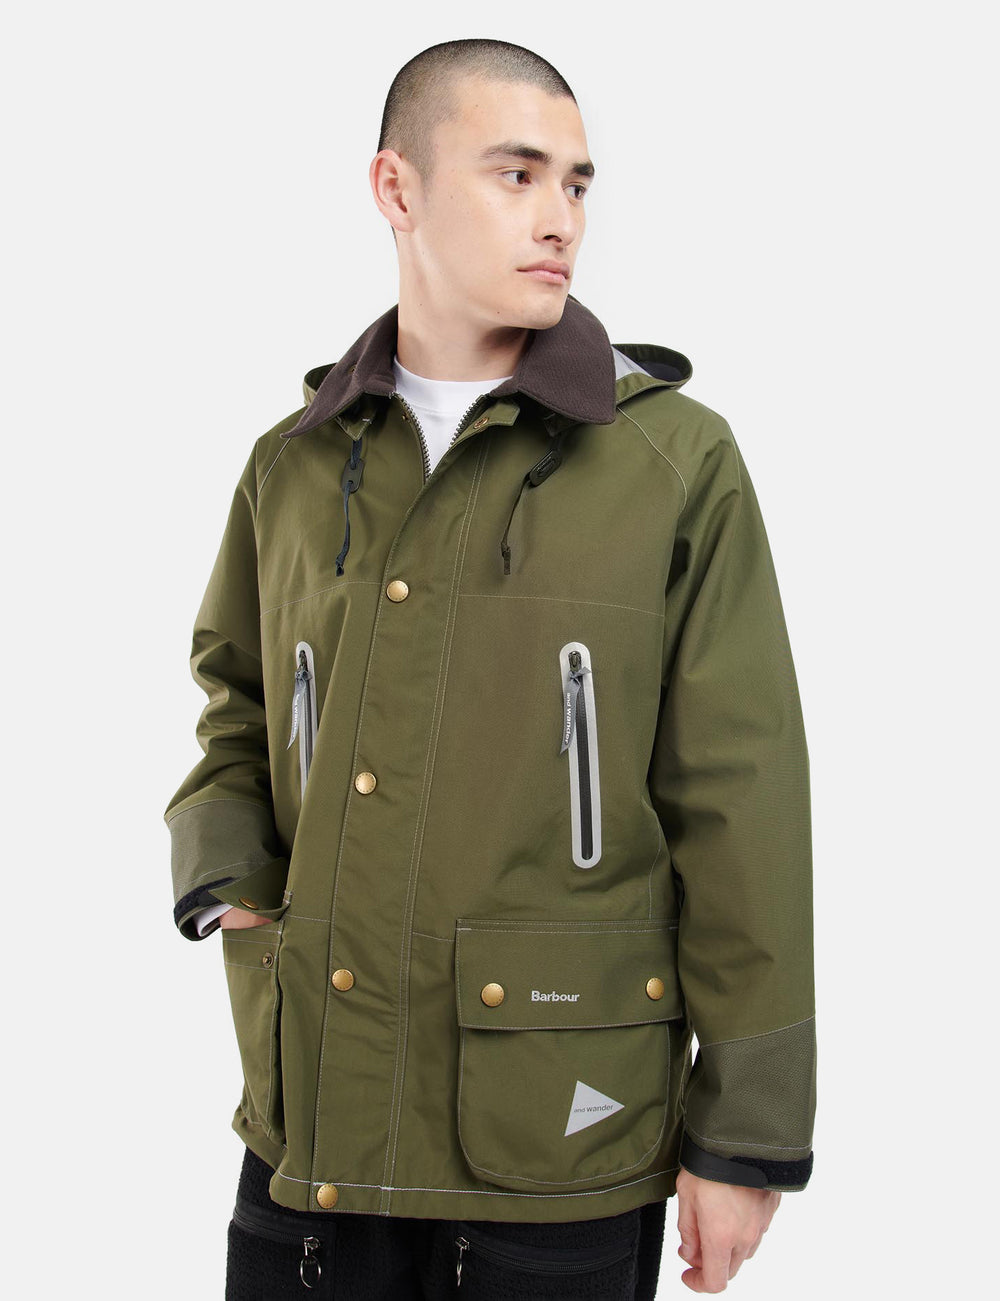 Barbour x And Wander 3L Coat - Dark Olive Green I Urban Excess